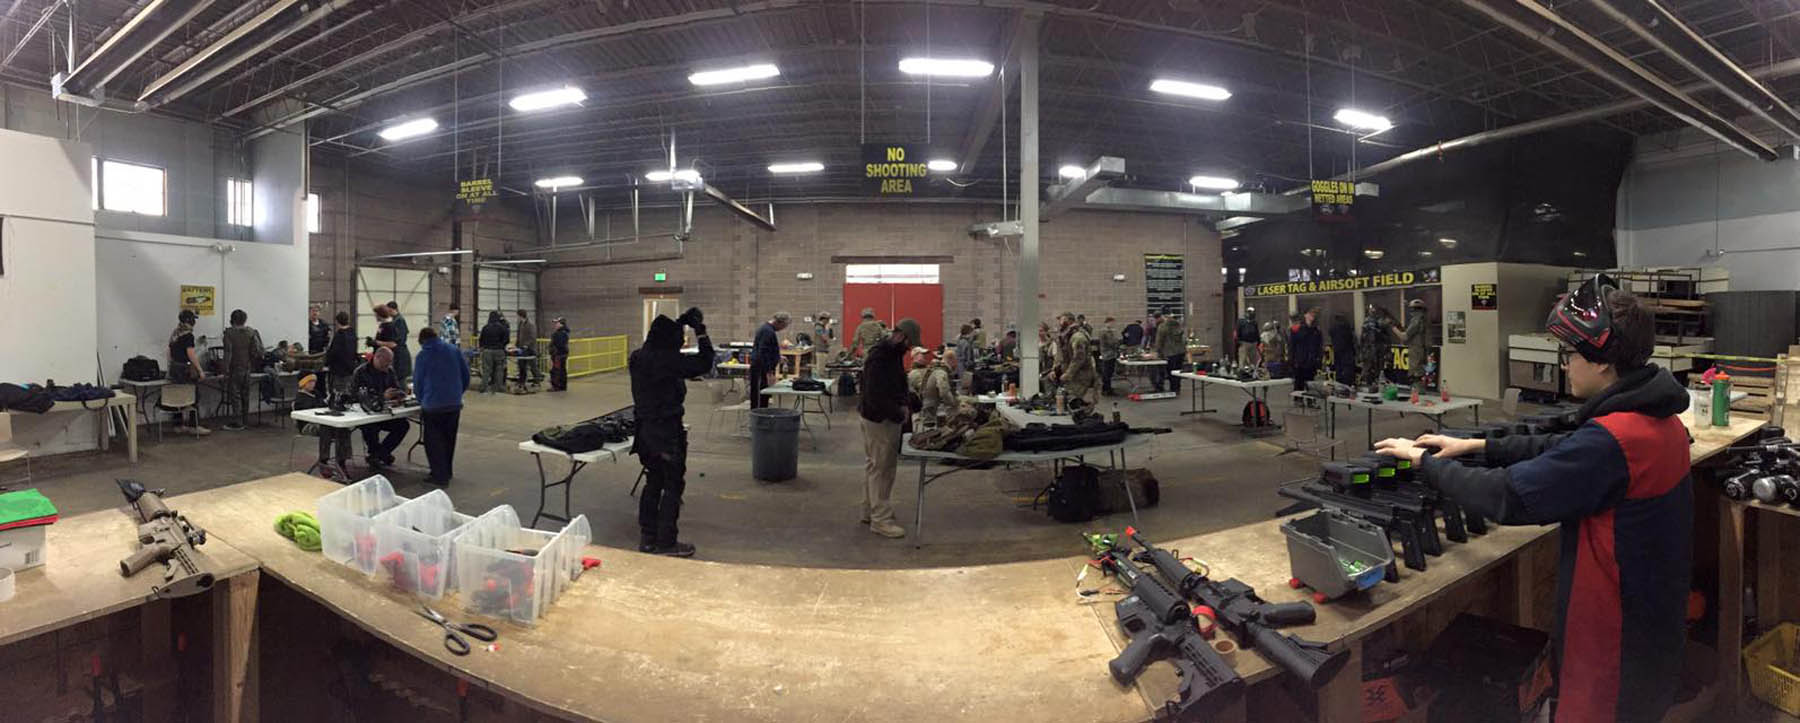 Airsoft Fields And Airsoft Store In Denver Colorado